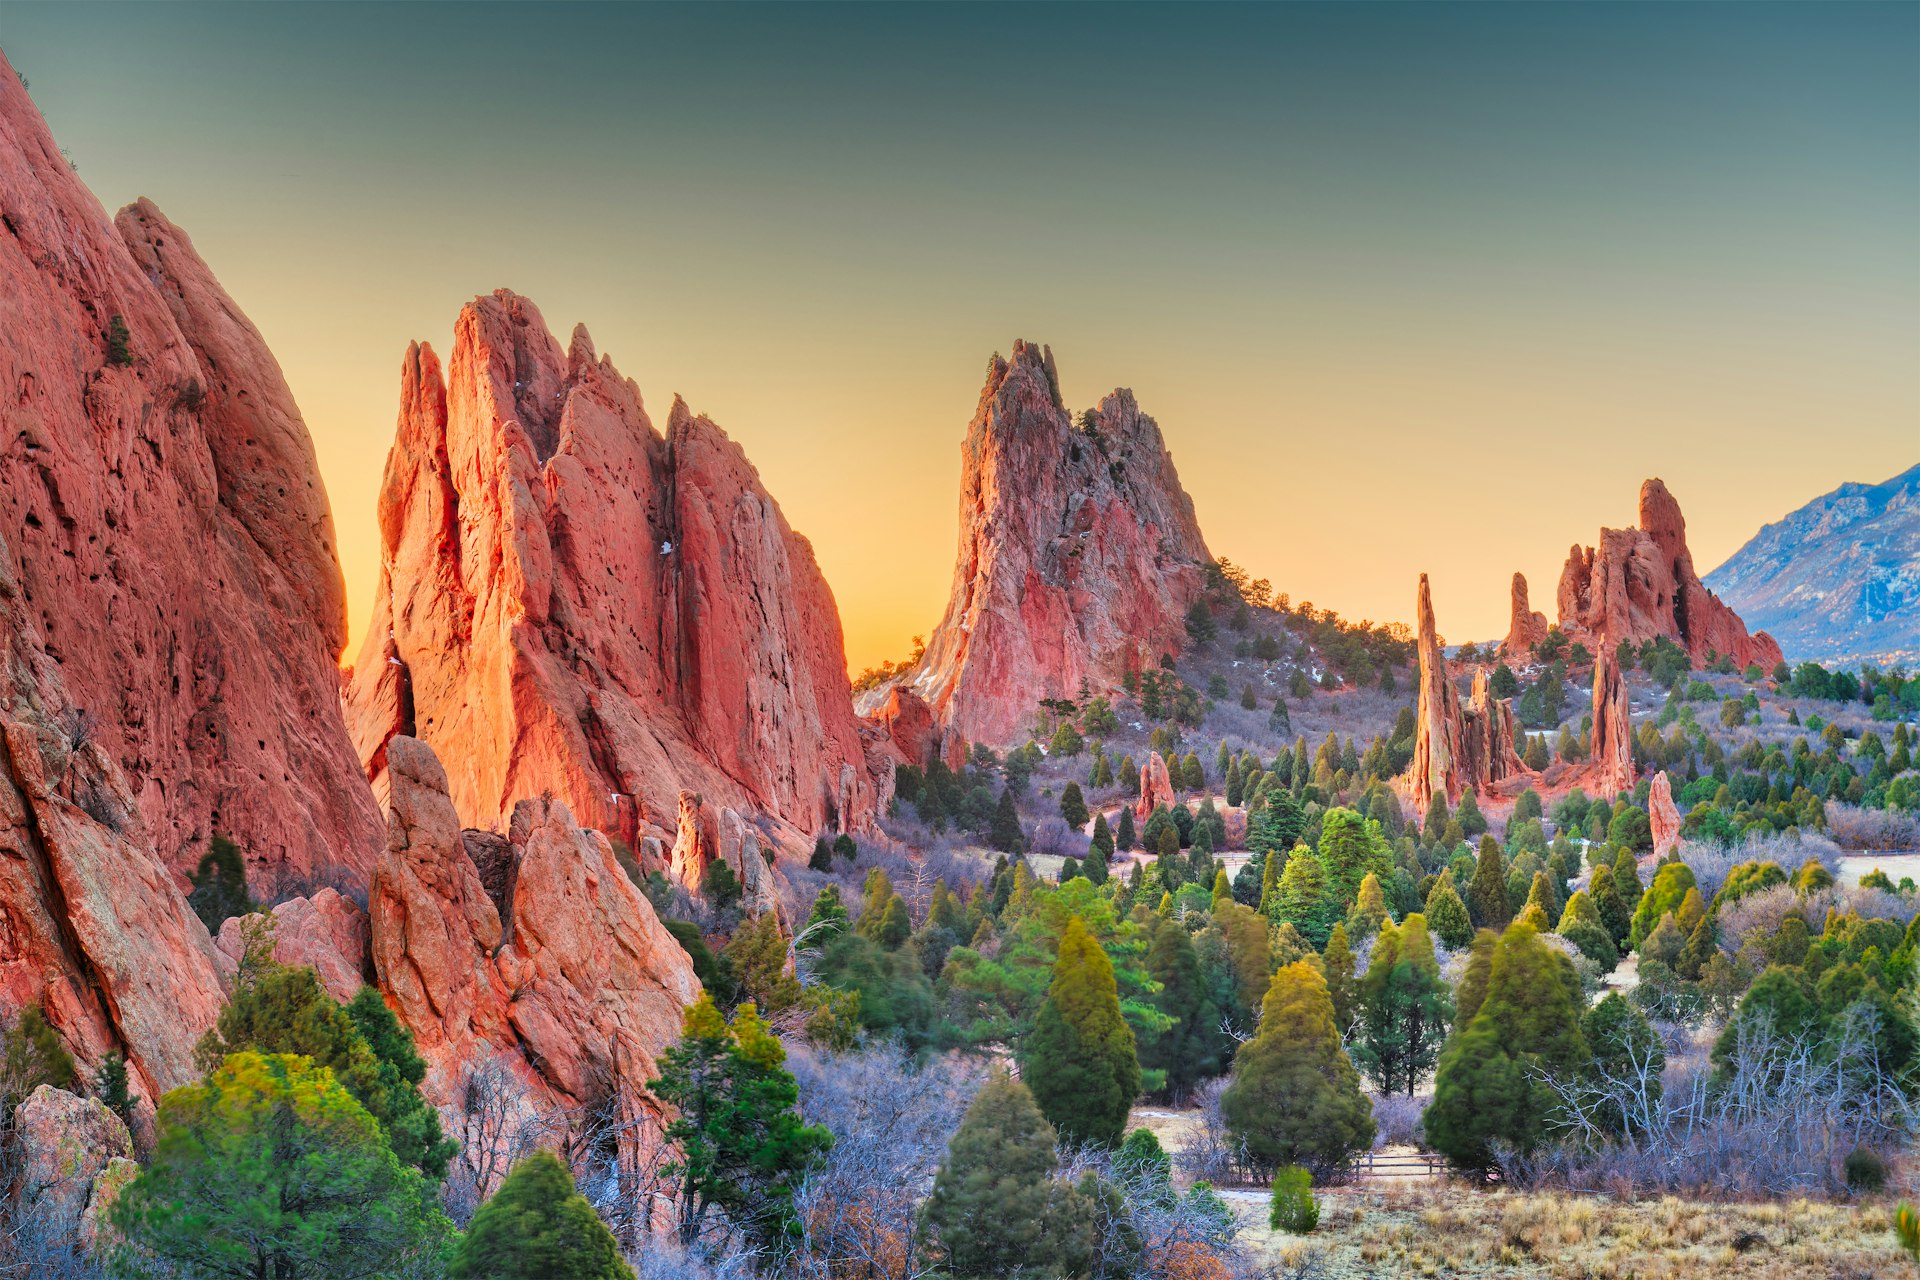 The soaring red rocks of Colorado's Garden of the Gods at magic hour